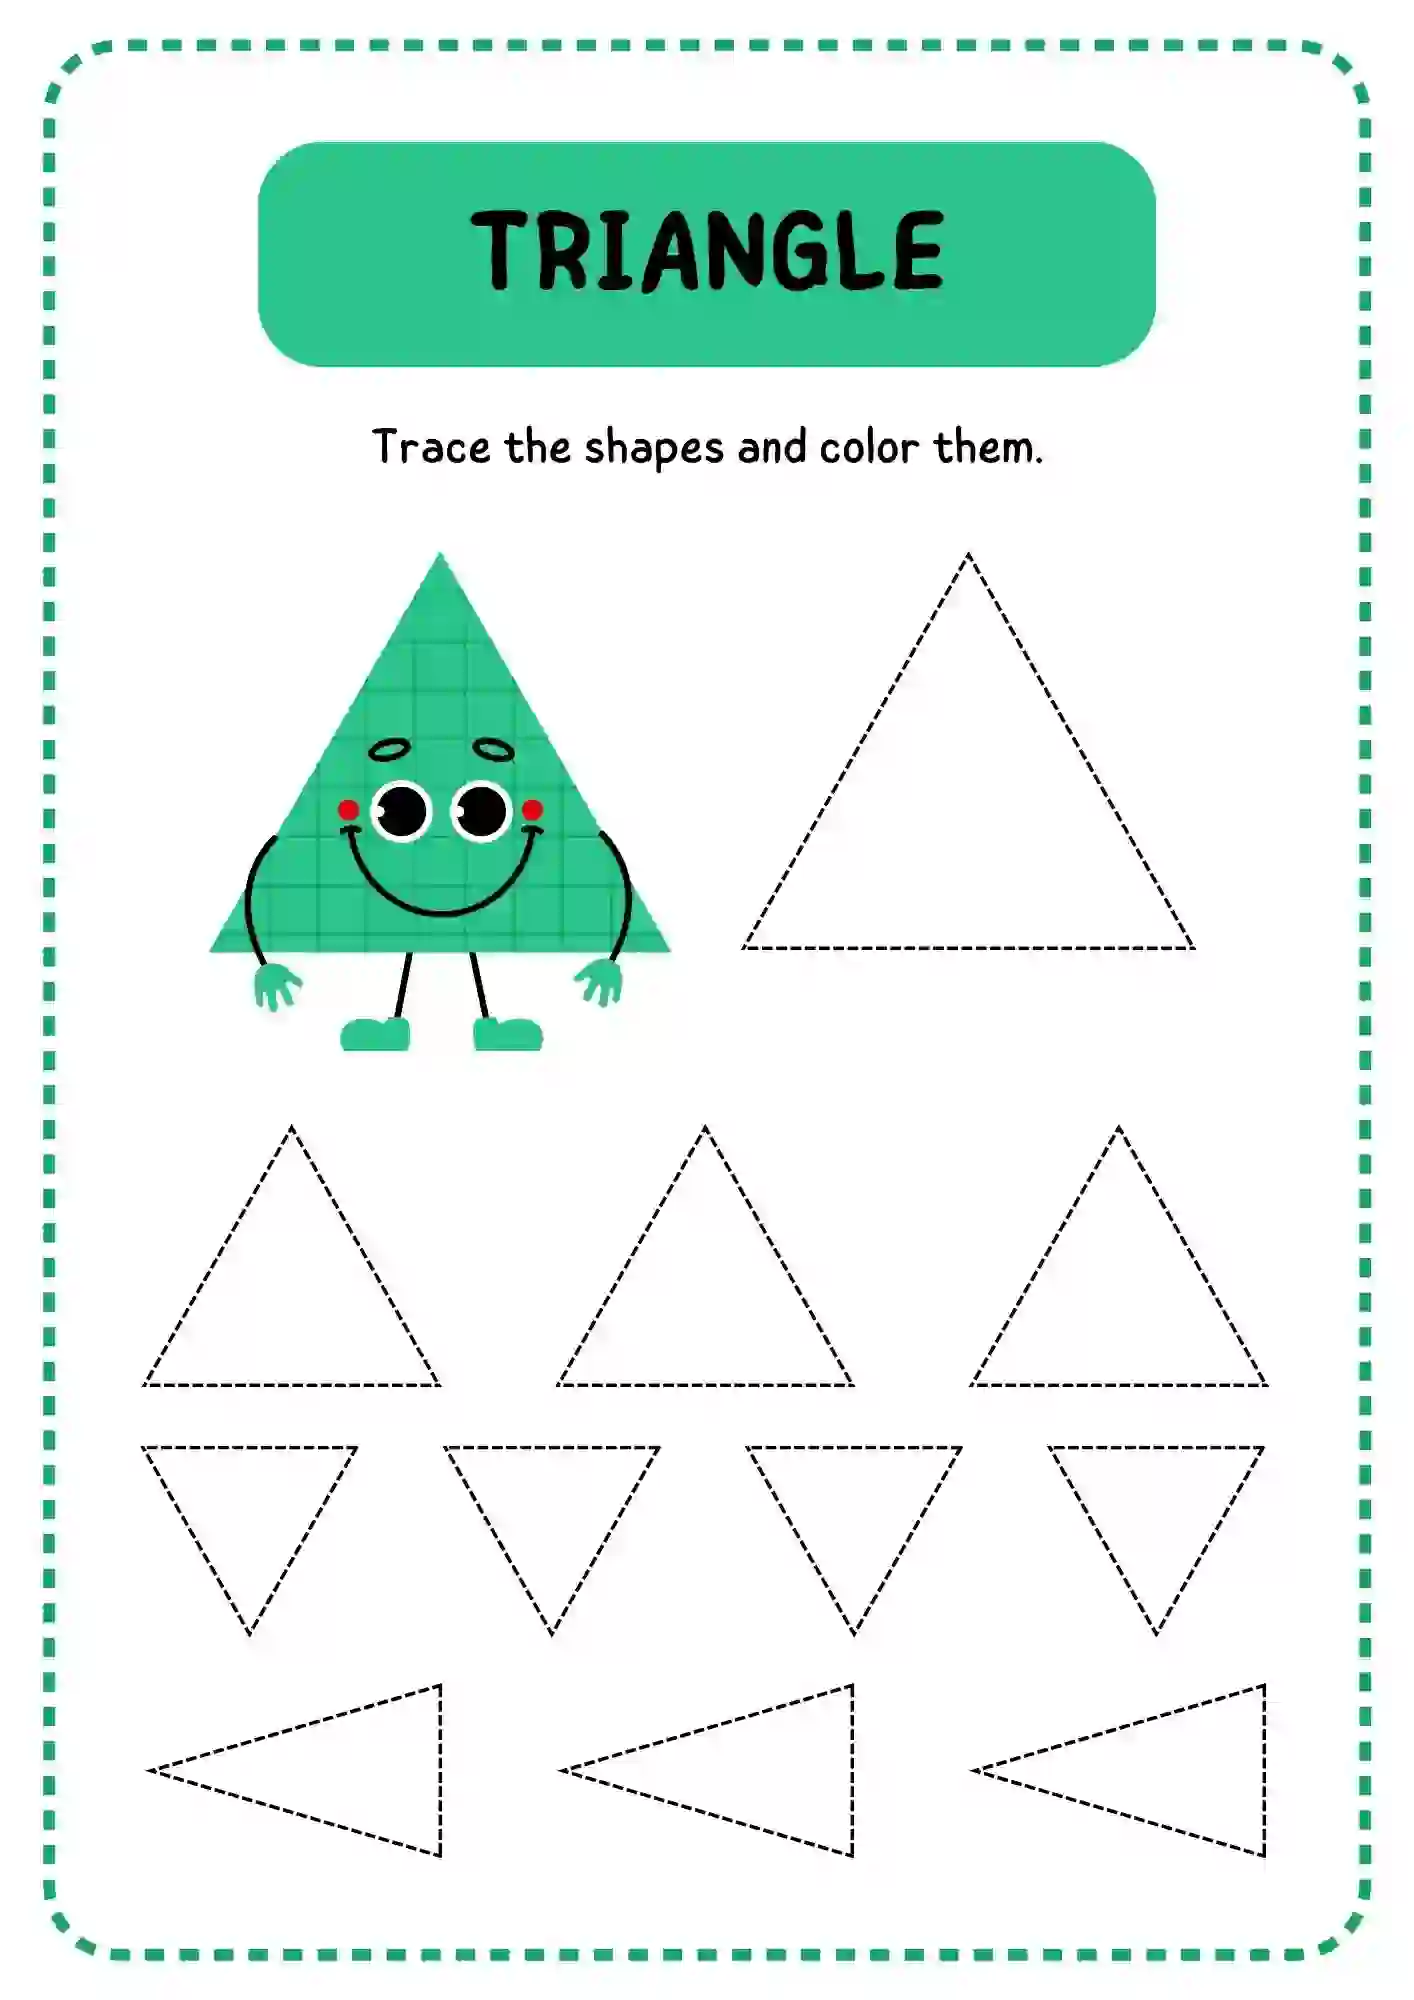 Shapes Tracing and Coloring Worksheets (triangle)